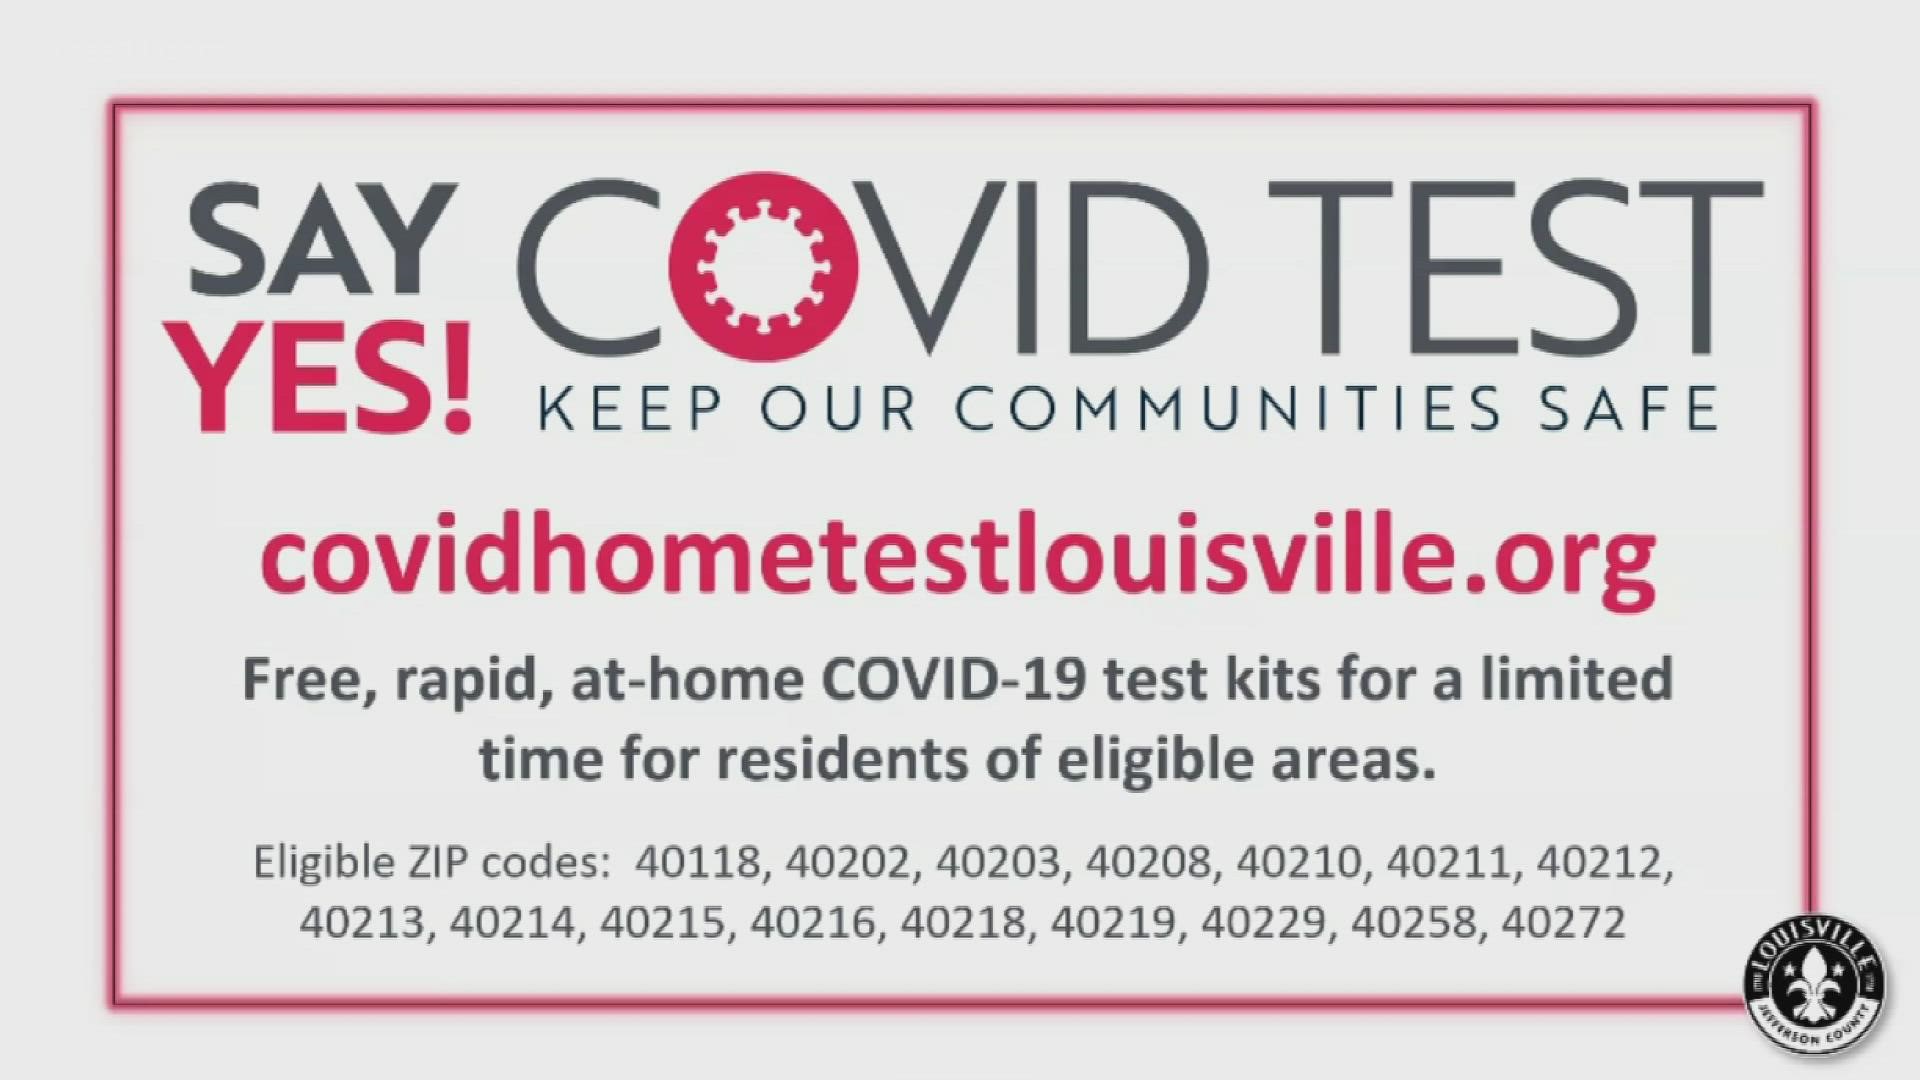 Through the Say Yes! to COVID Test program, families in 16 Jefferson County ZIP codes can receive a pack of free rapid COVID tests.